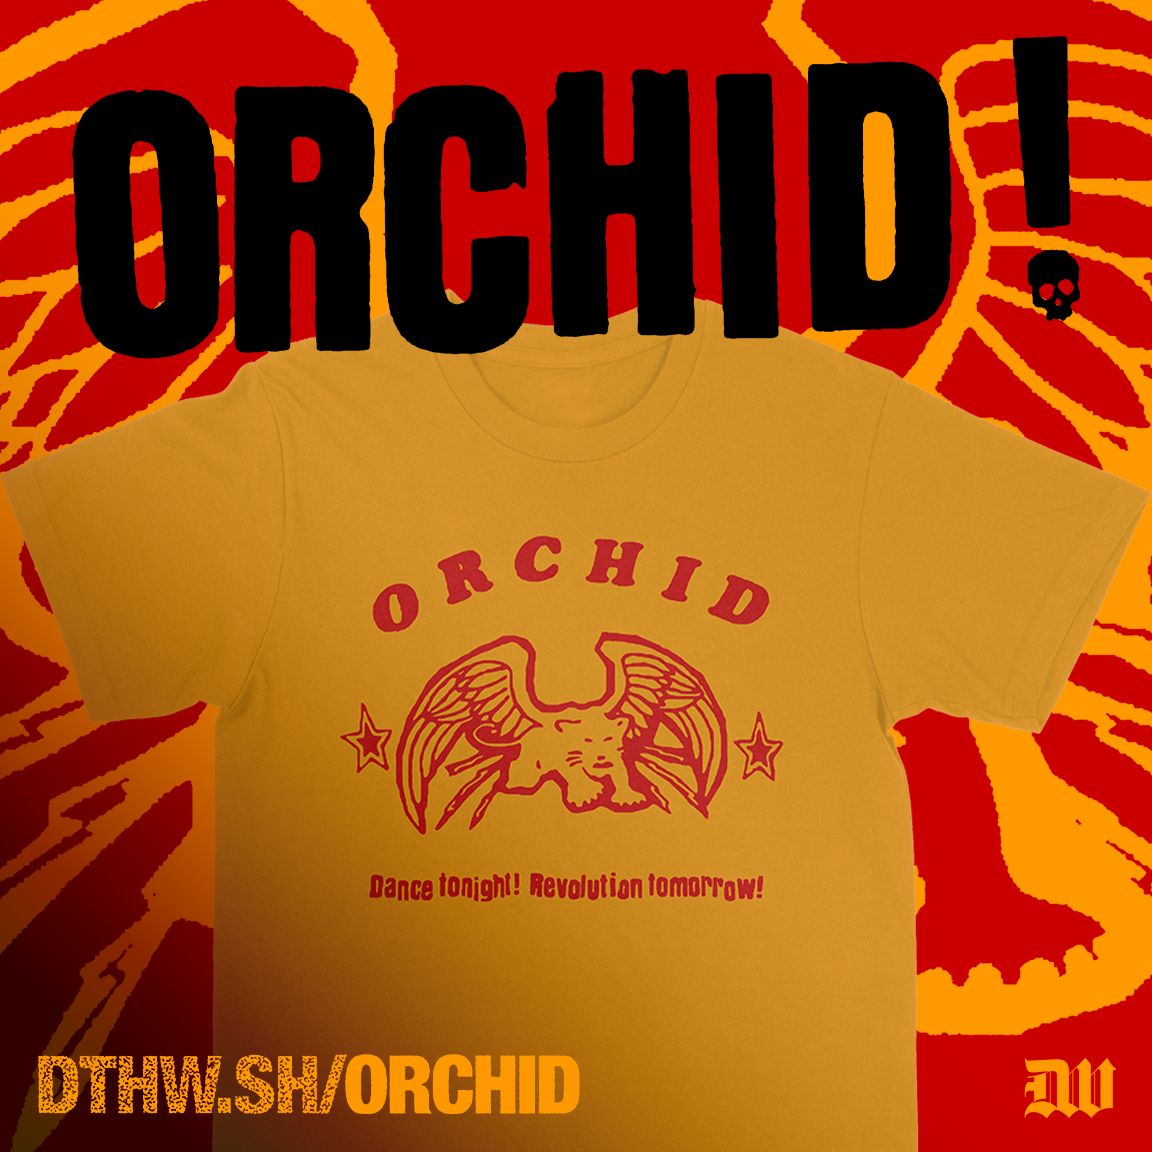 Orchid x Deathwish Store Merch & Music → dthw.sh/orchid Upcoming Shows: 06/01 - Toronto, ON | Phoenix Theater